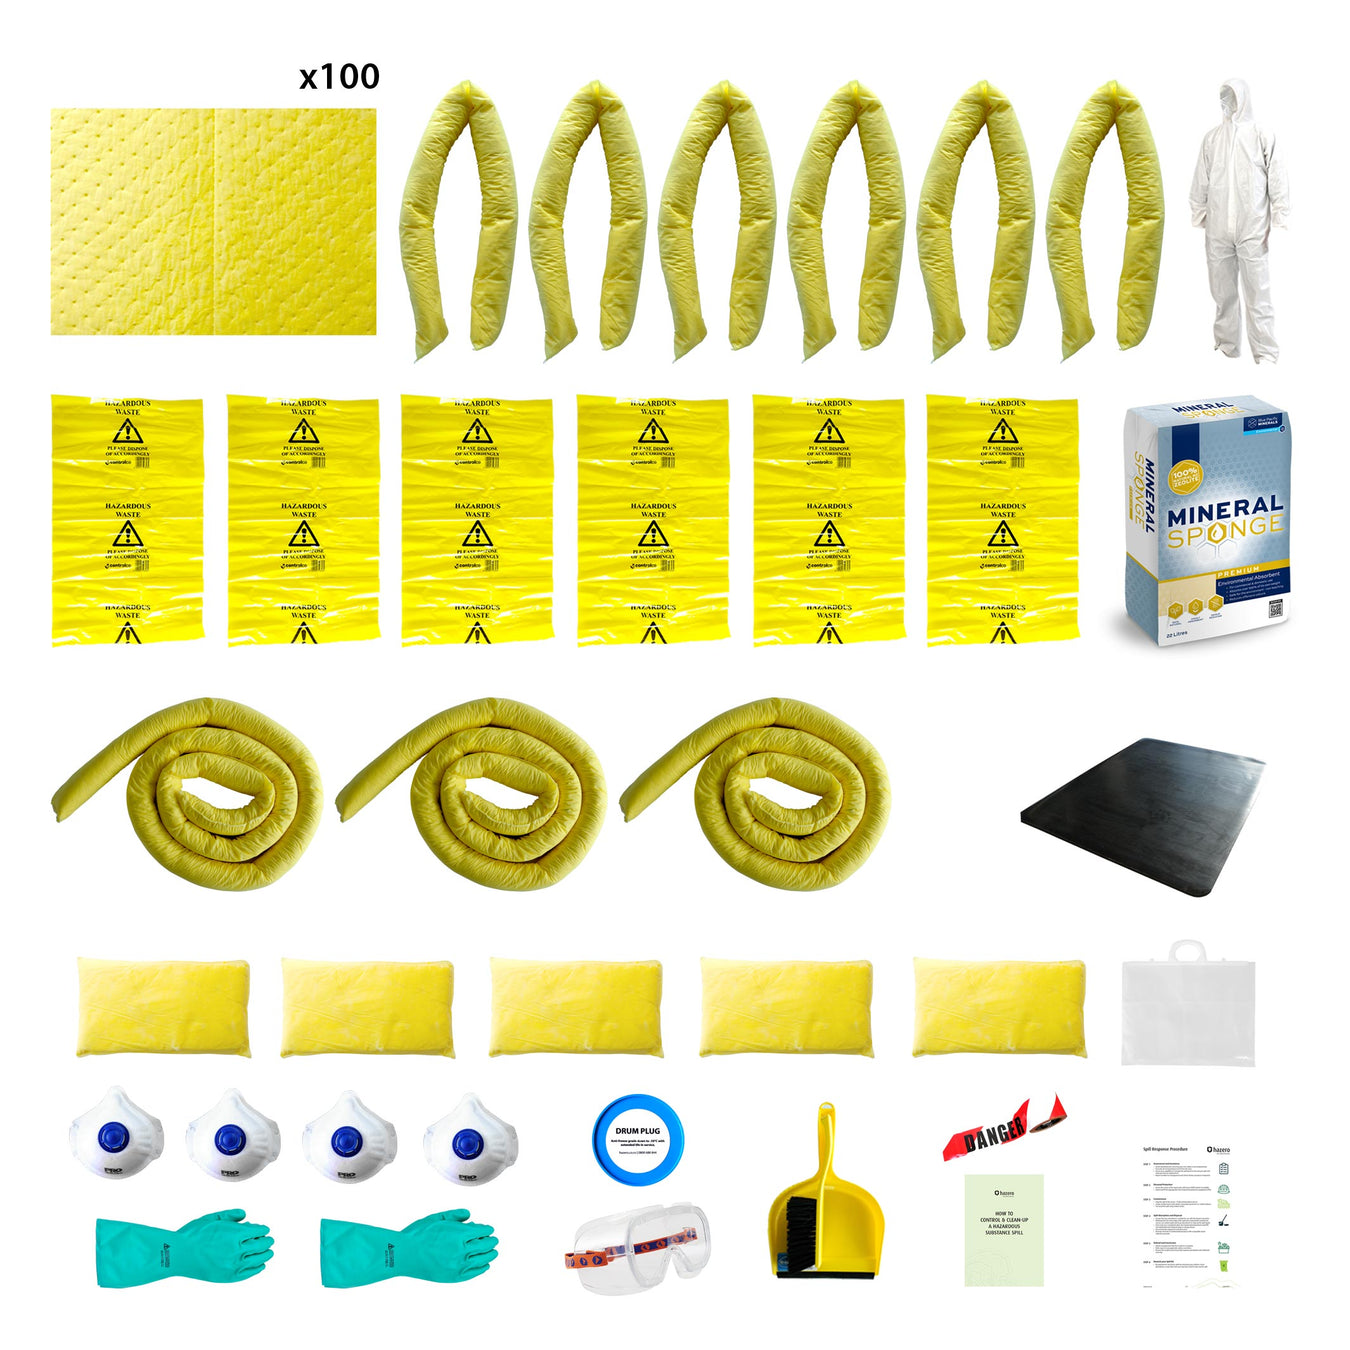 Chemical Spill Kits & Accessories